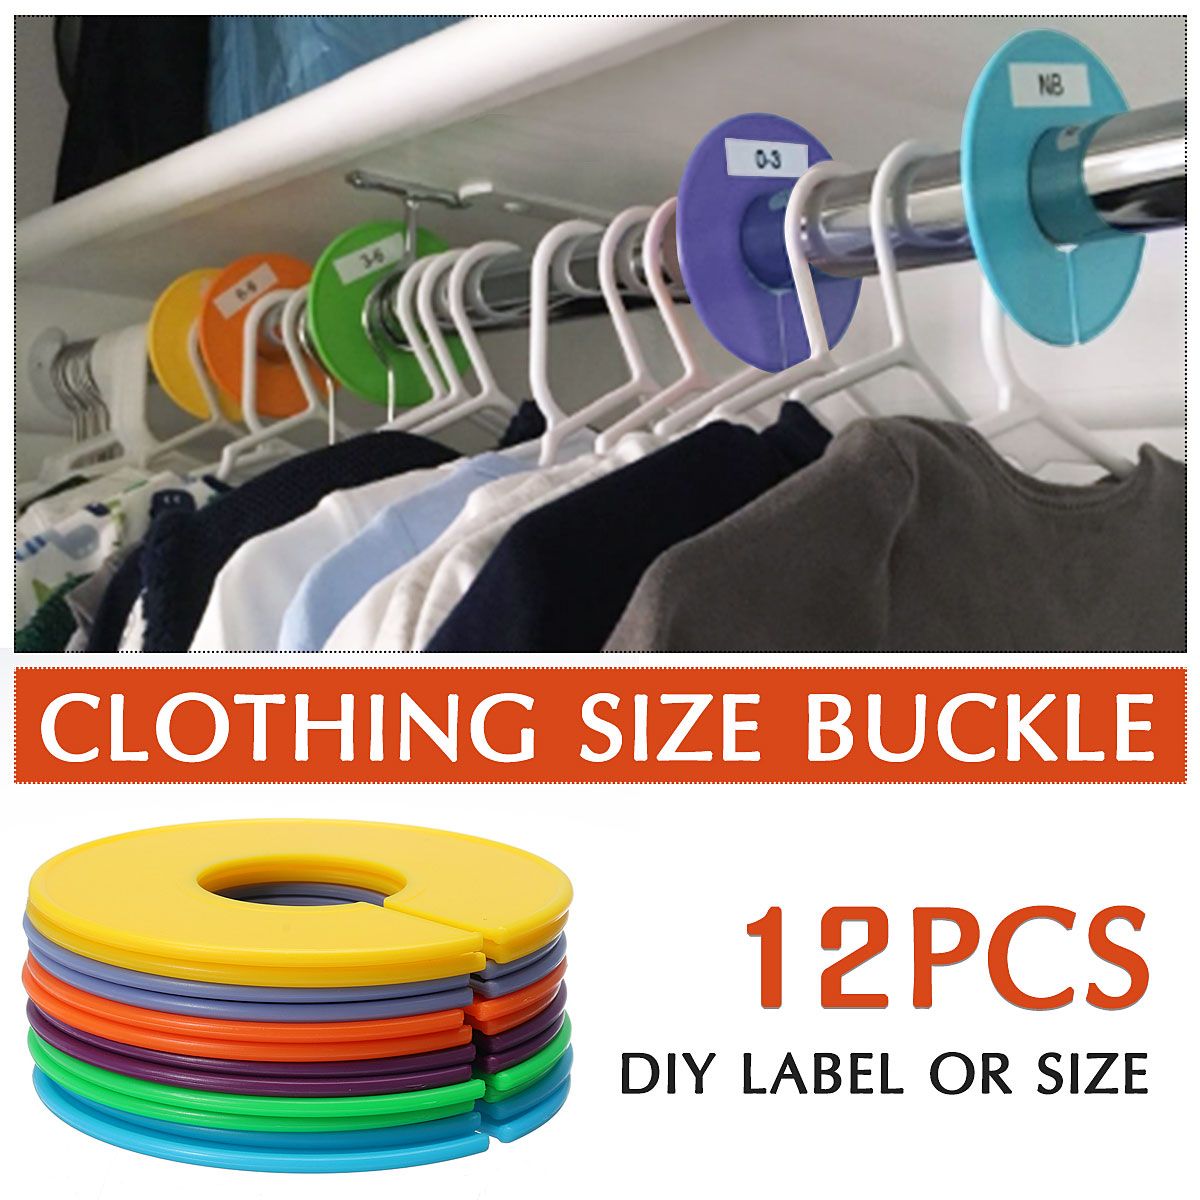 12PcsSet-Round-Size-Dividers-Clothing-Blank-Rack-Clothes-Stores-Hangers-Ring-Decorations-1581085